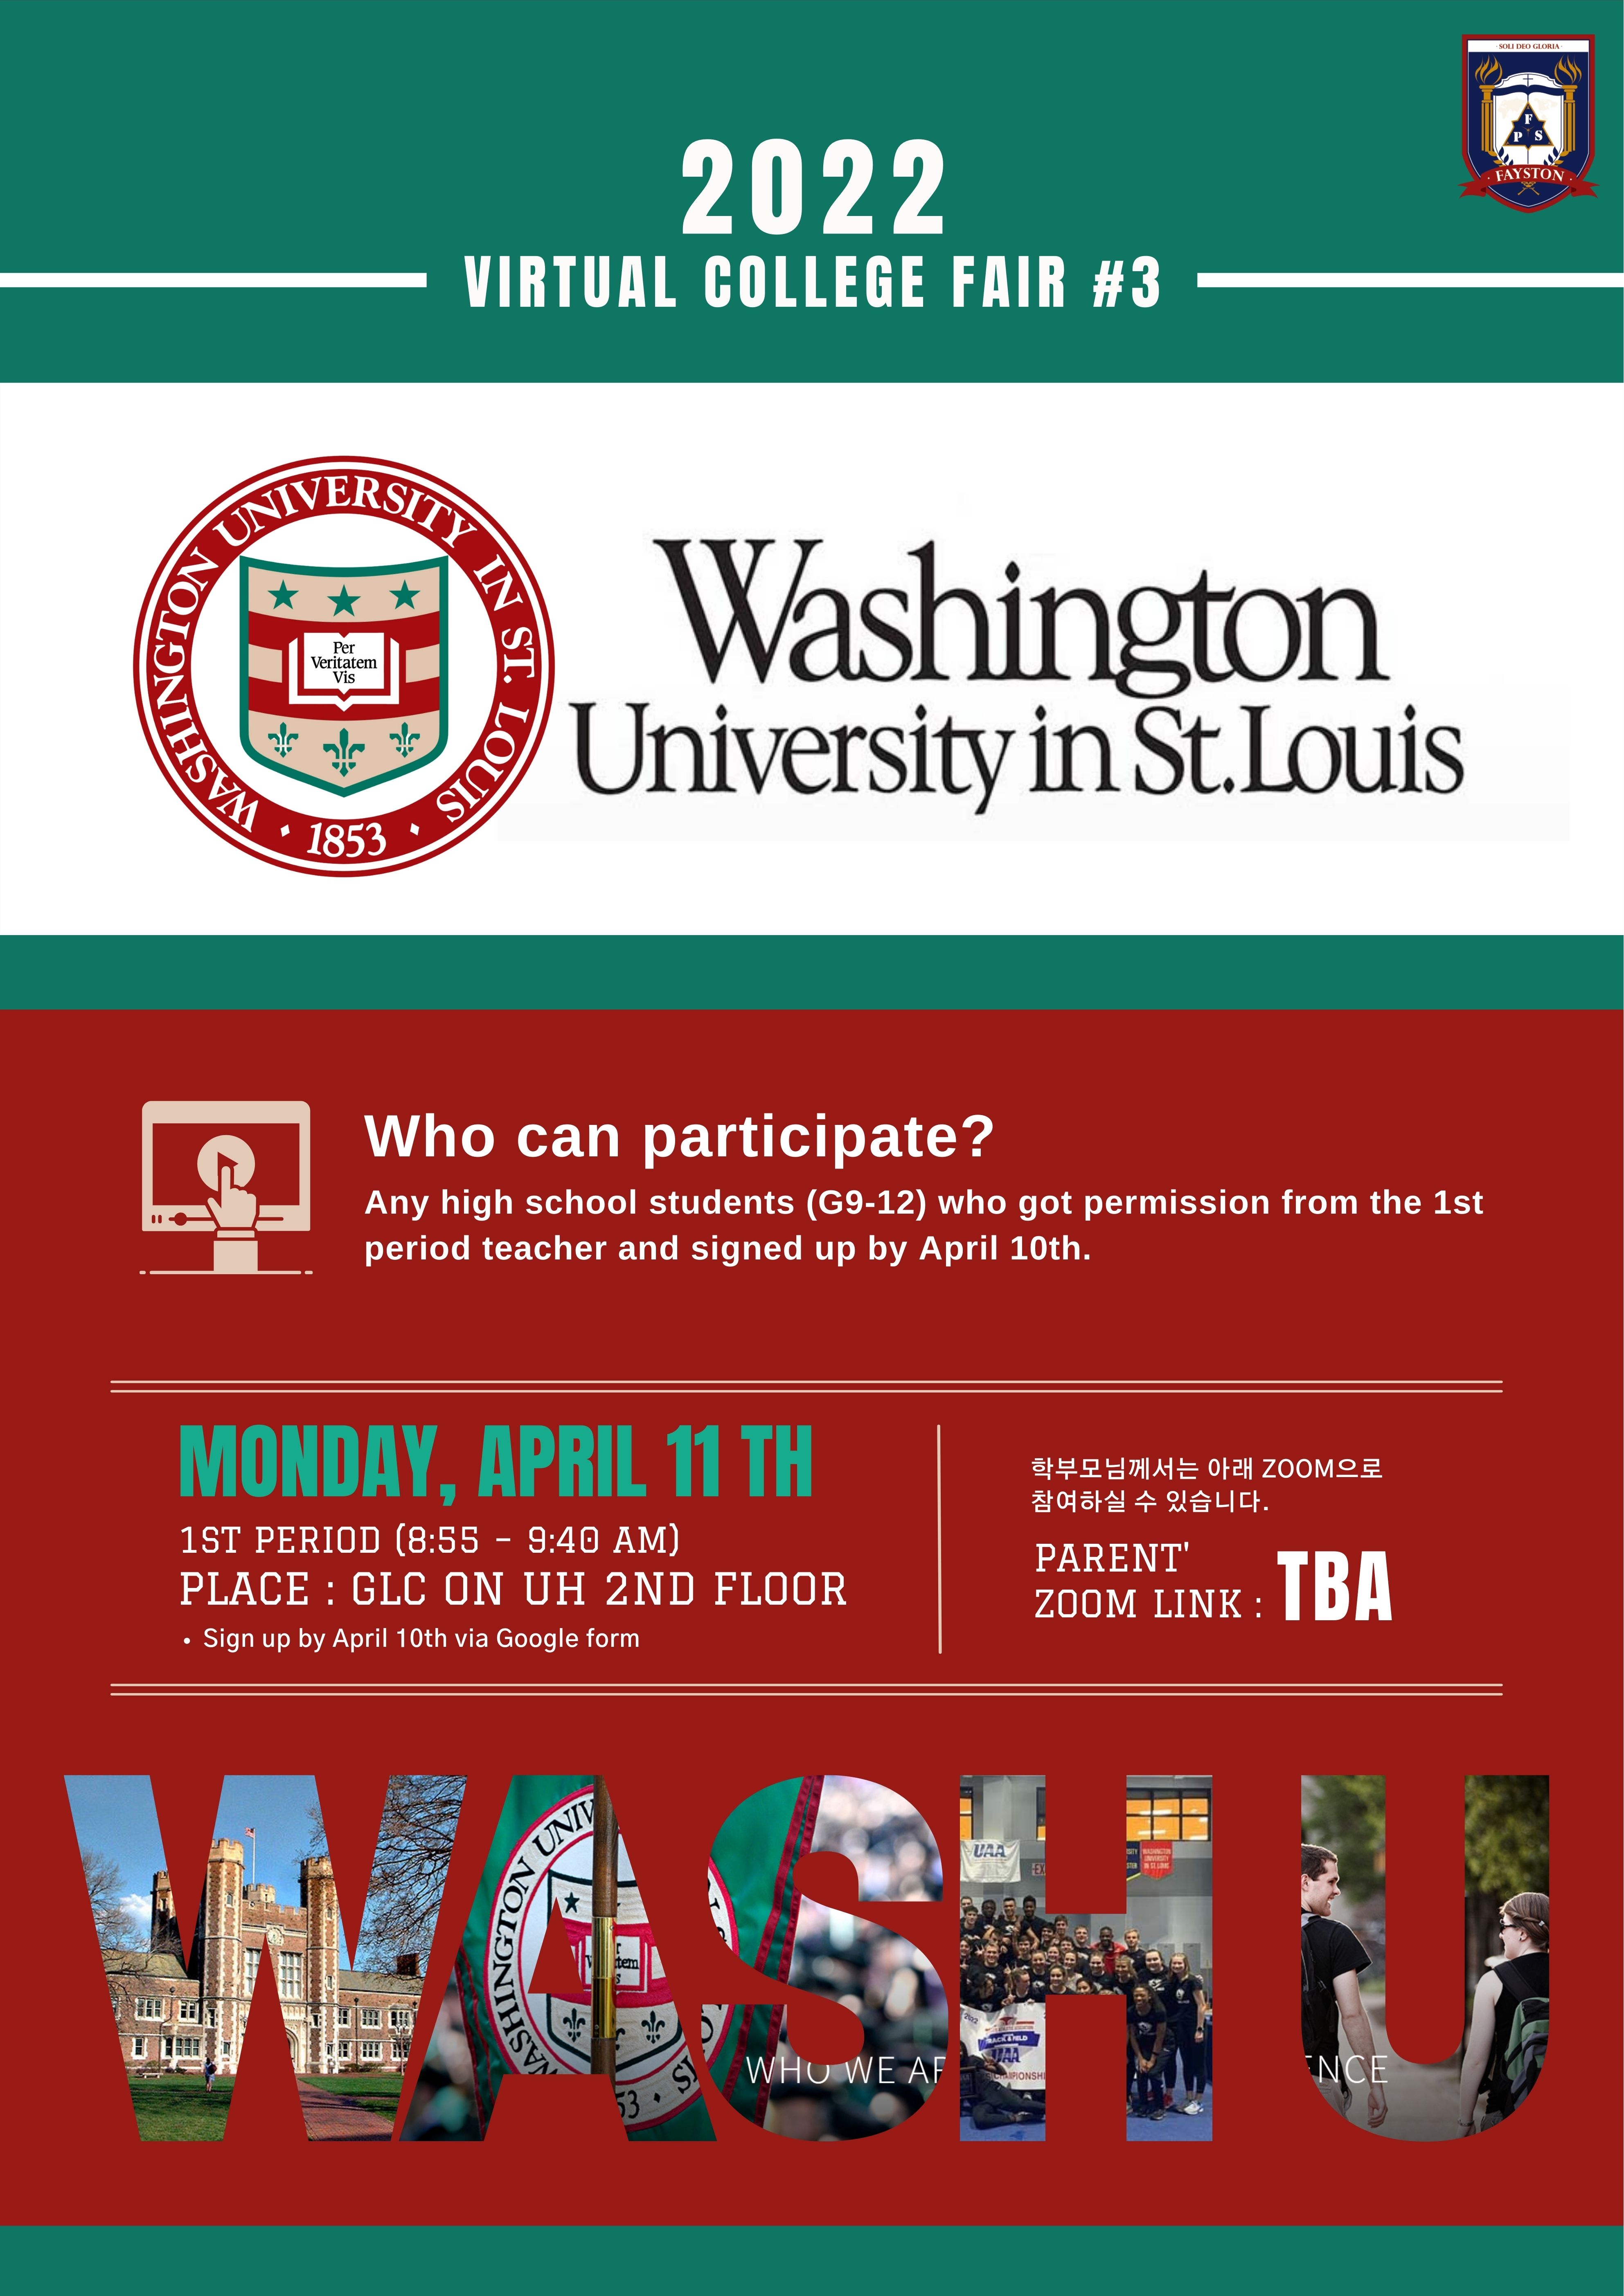 WashU Info Session Rescheduled on April 11th!